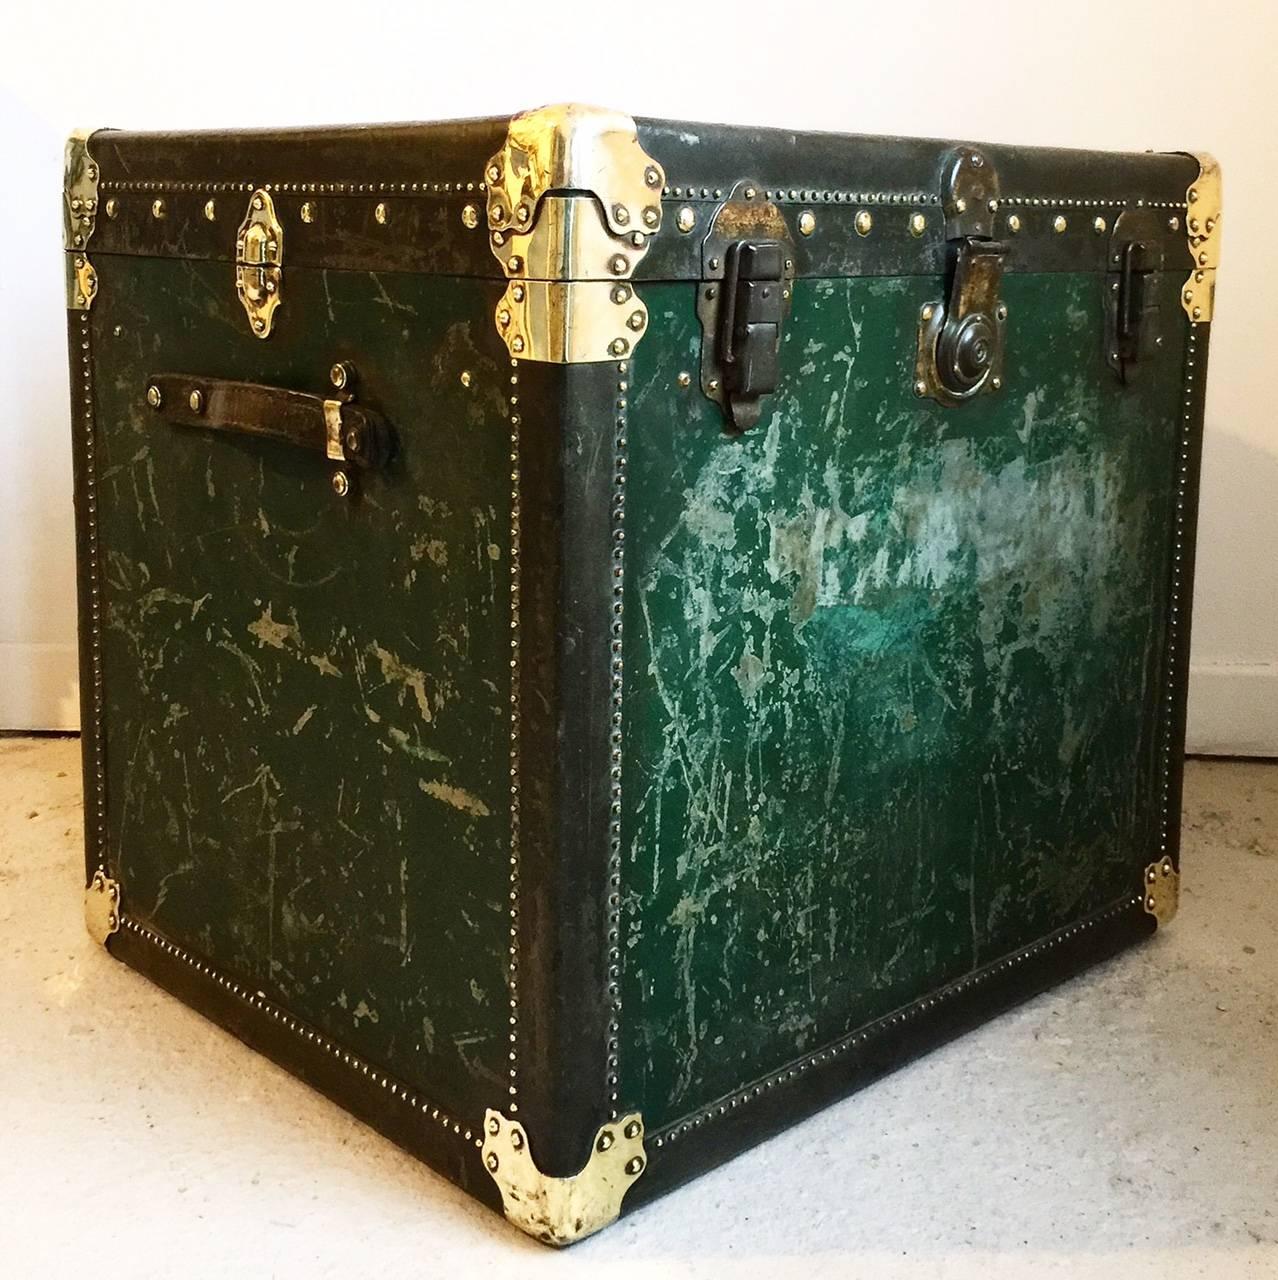 Vintage antique steamer trunk which would look fabulous as a coffee or side table in very good vintage condition.